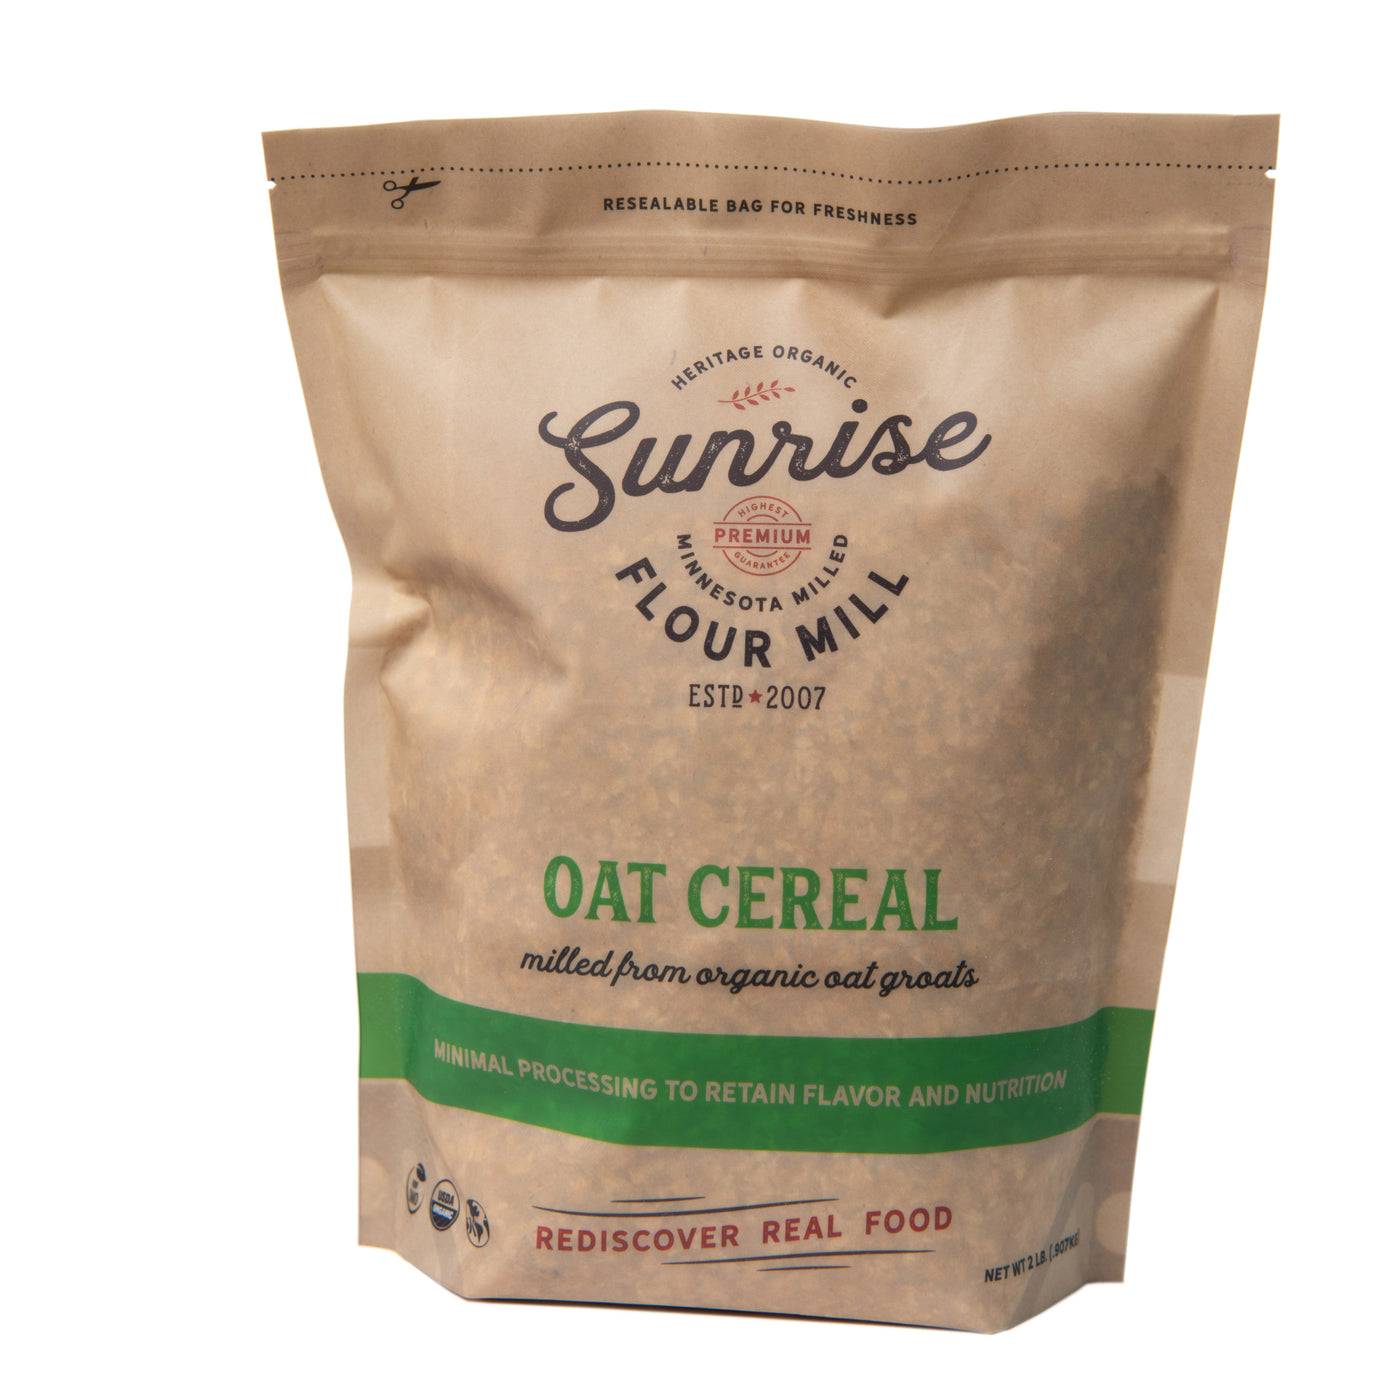 Organic Oat Cereal (2 lbs)